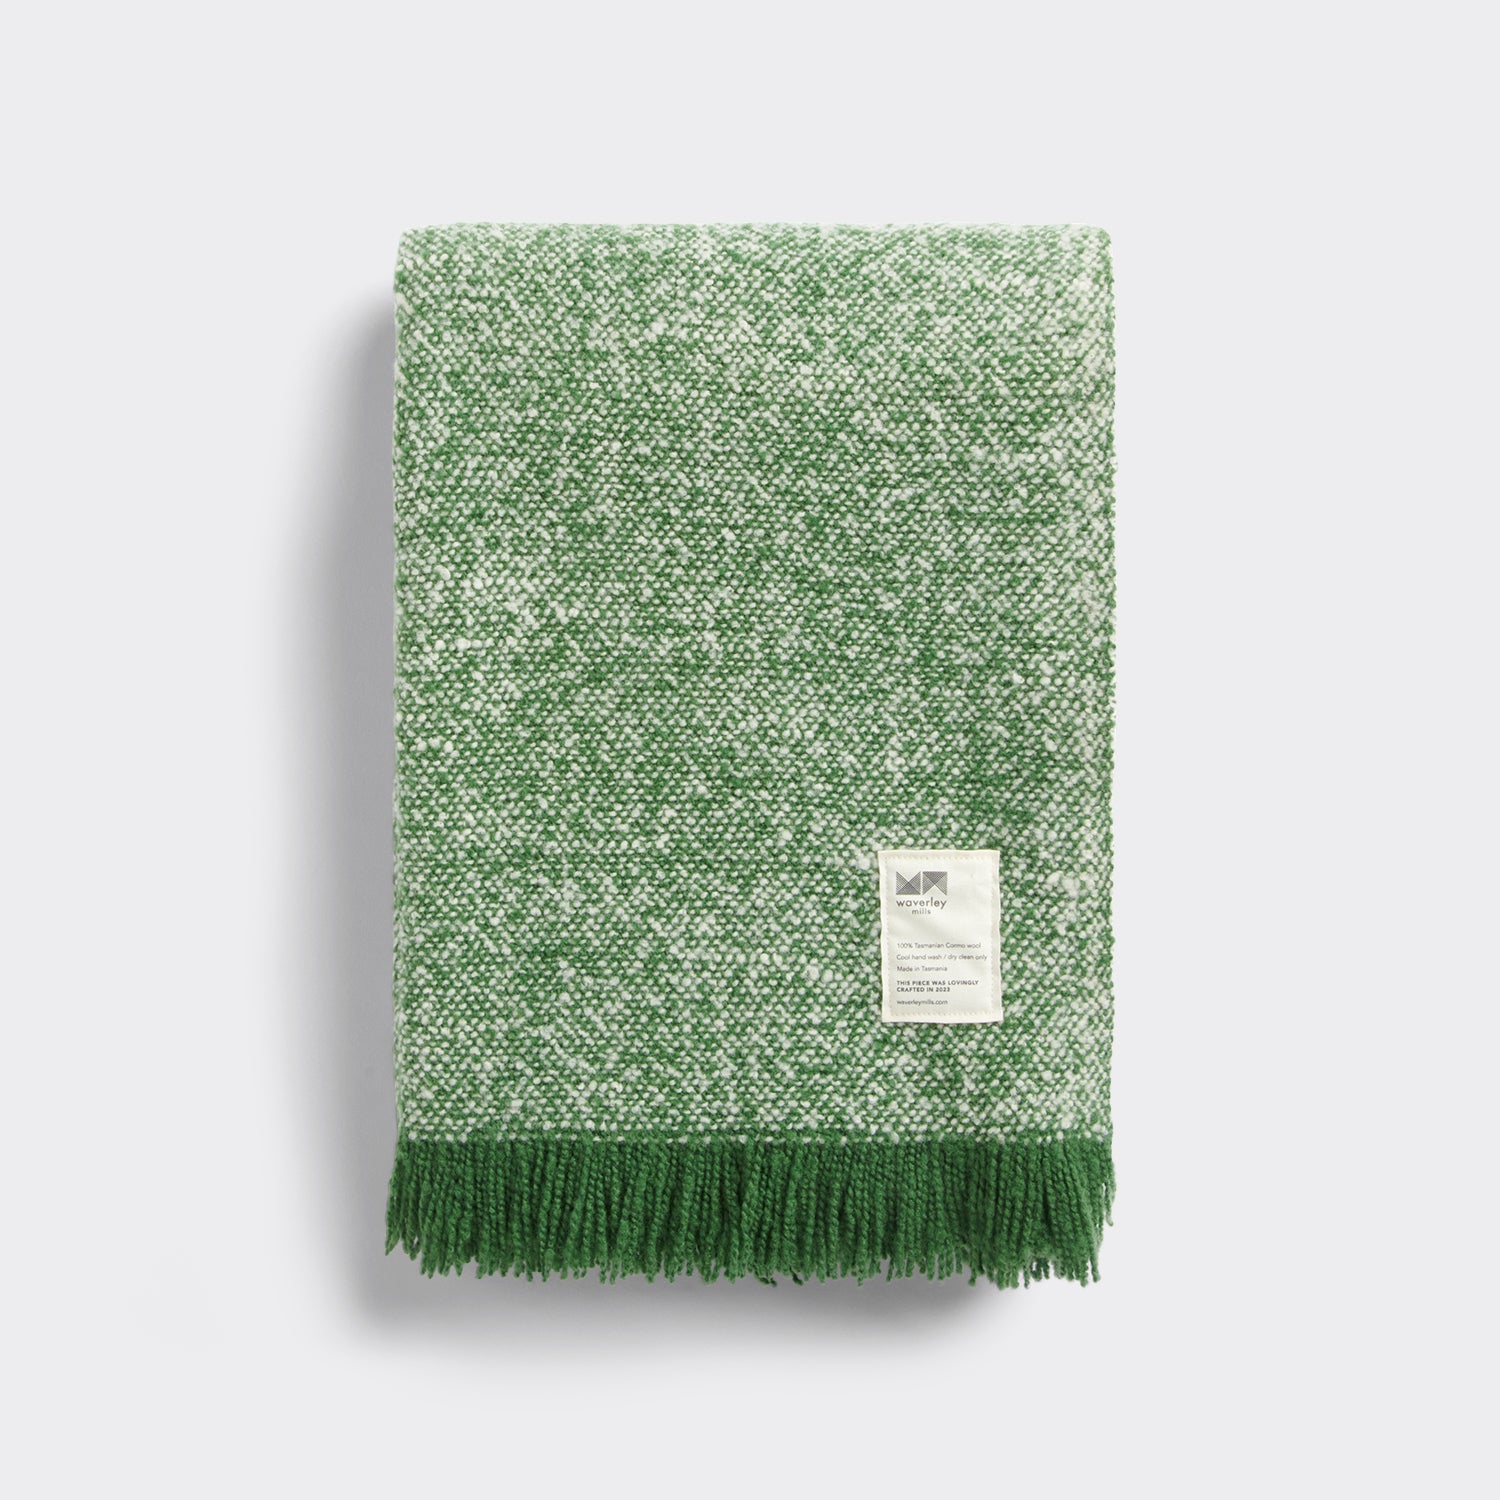 Folded cooper's cormo throw in artichoke green and natural.